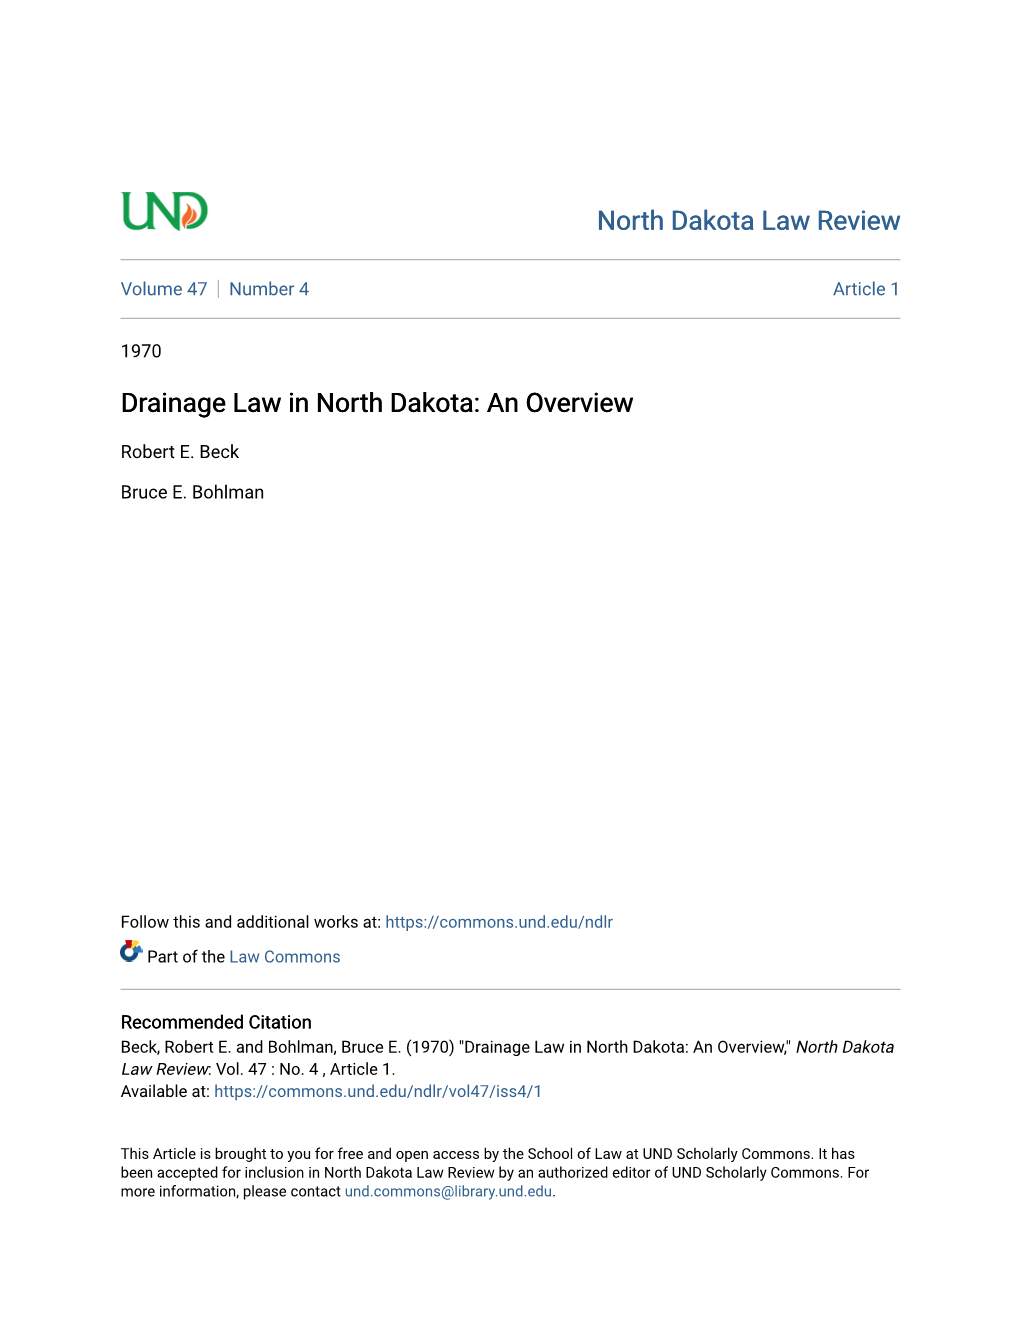 Drainage Law in North Dakota: an Overview